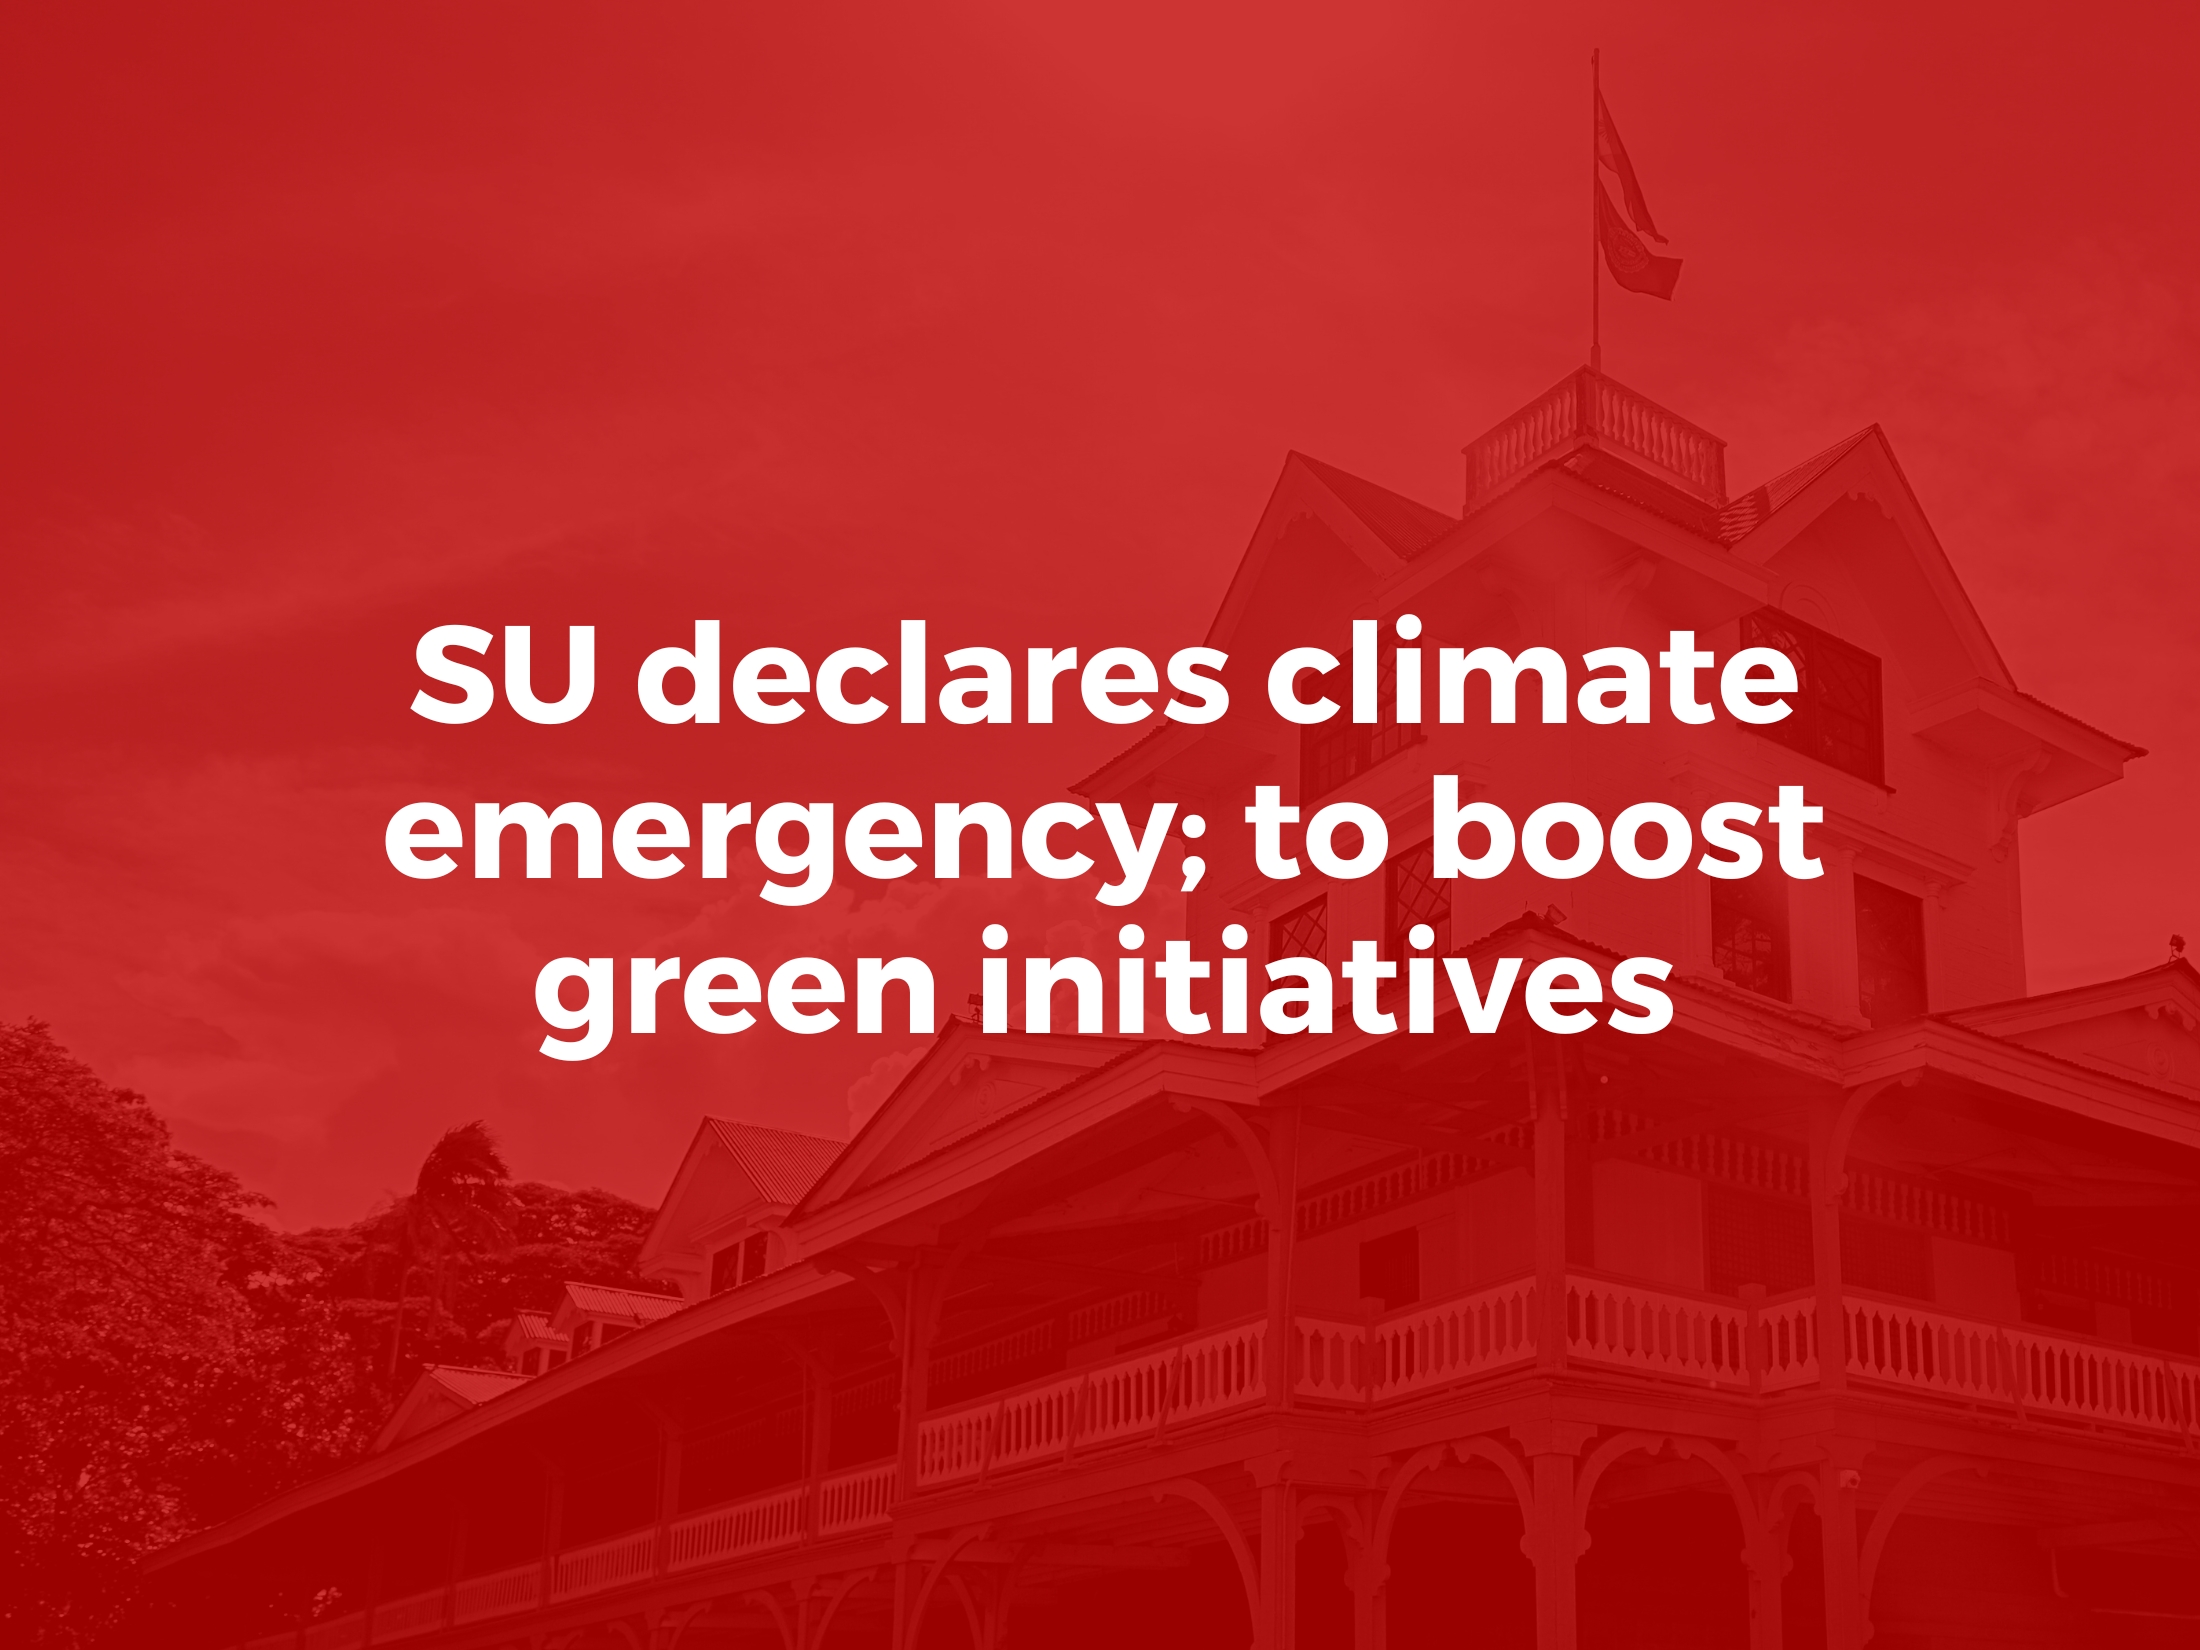 SU declares climate emergency; to boost green initiatives